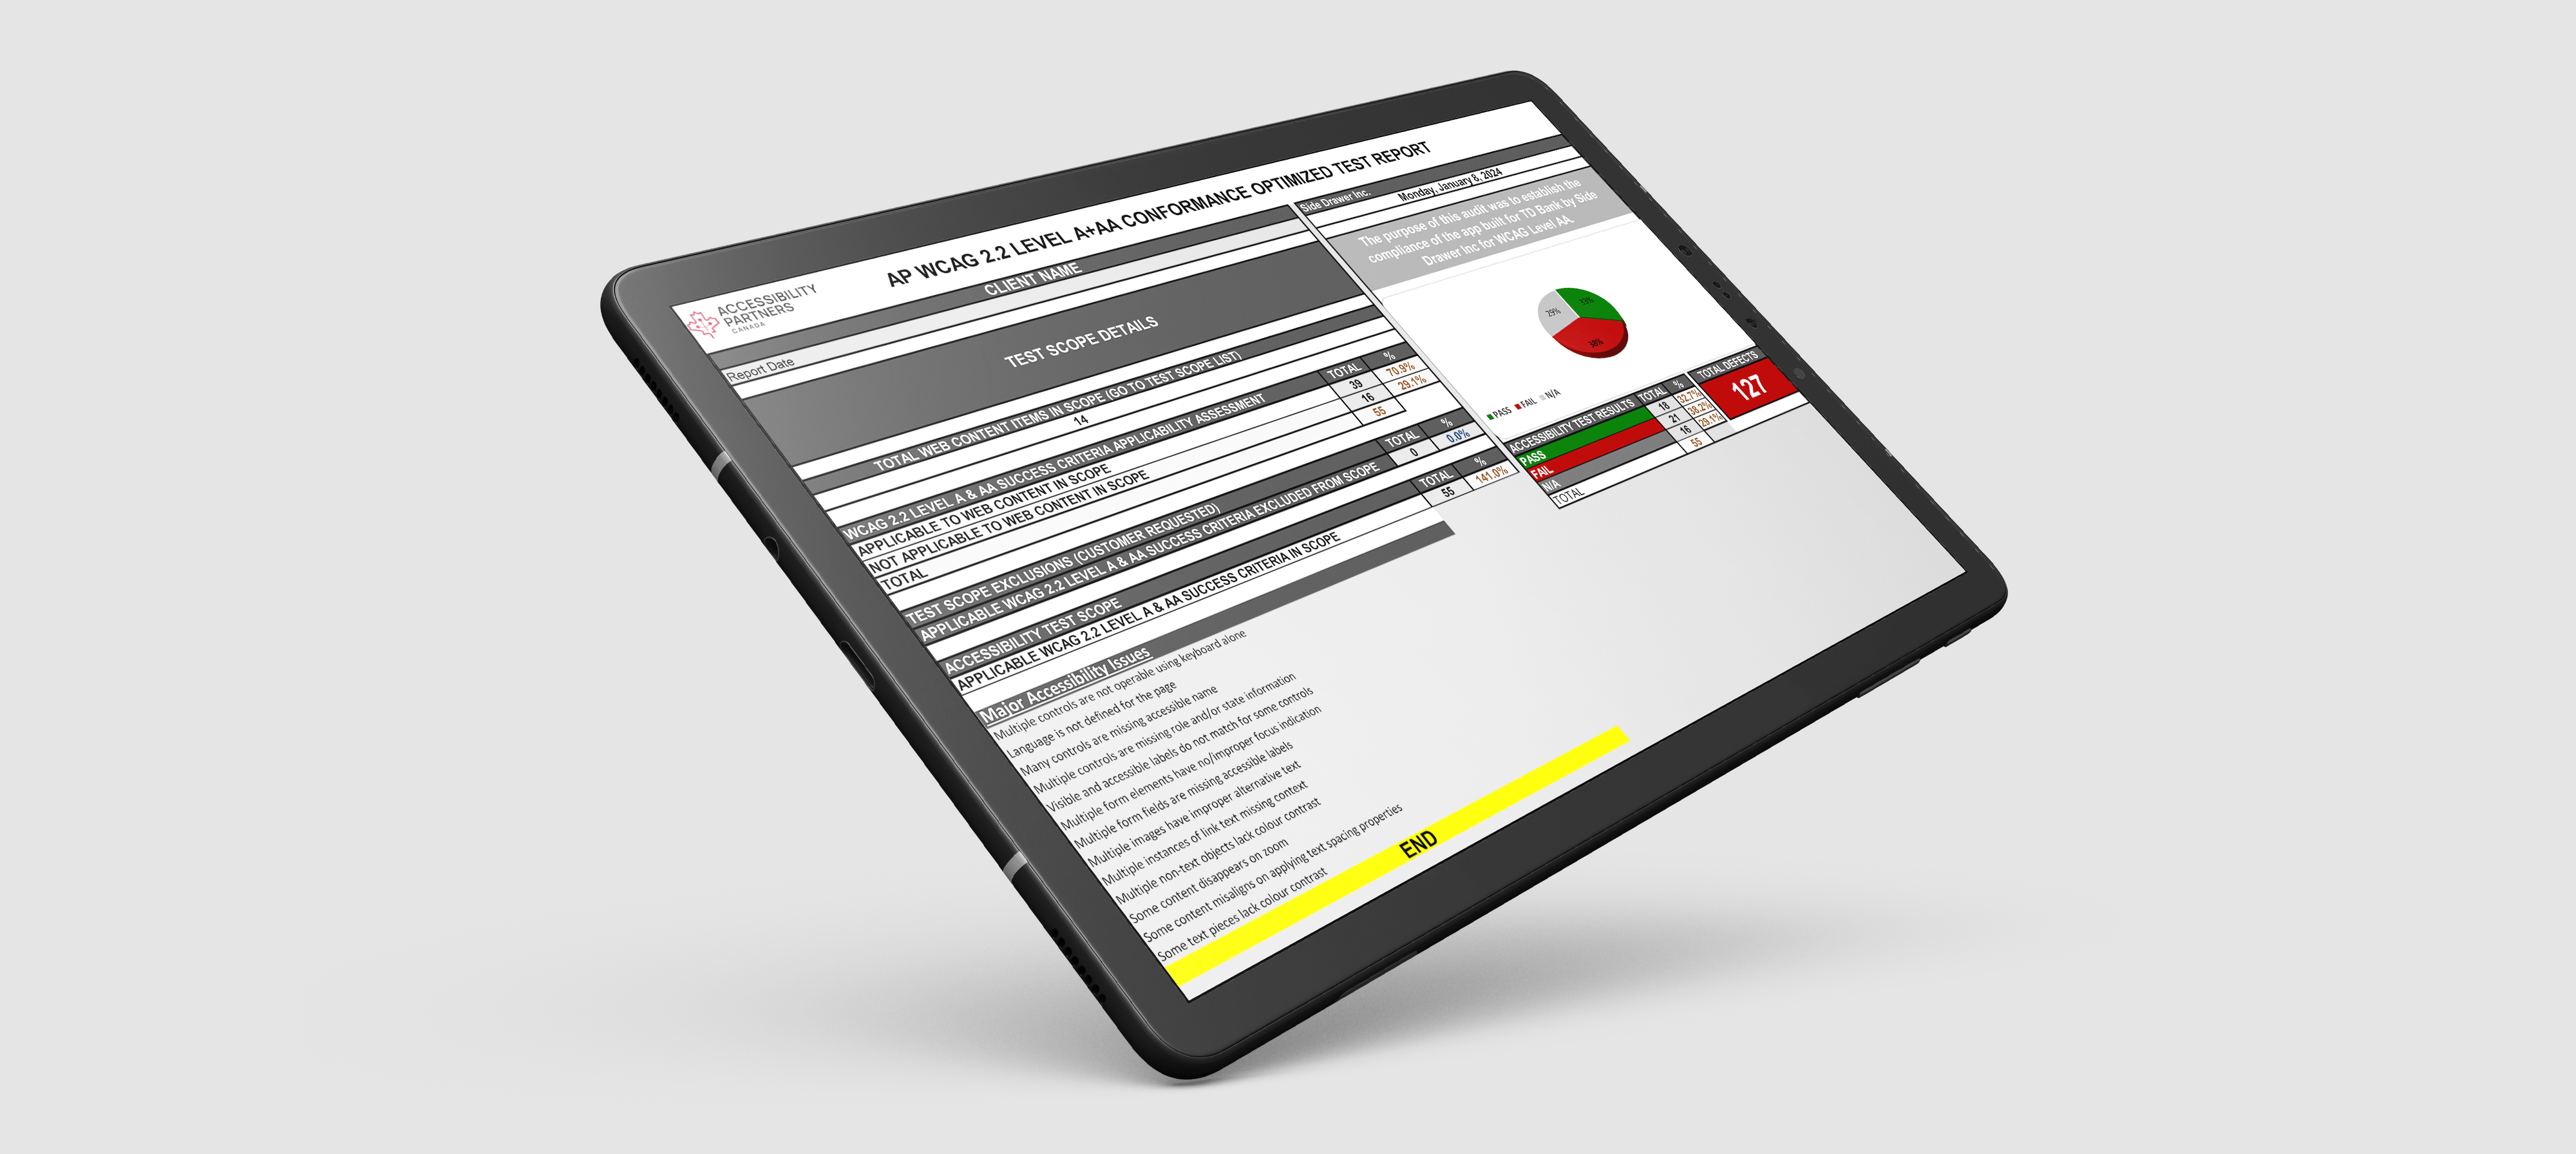 A tablet device showing the summary page for a conformance optimized test report